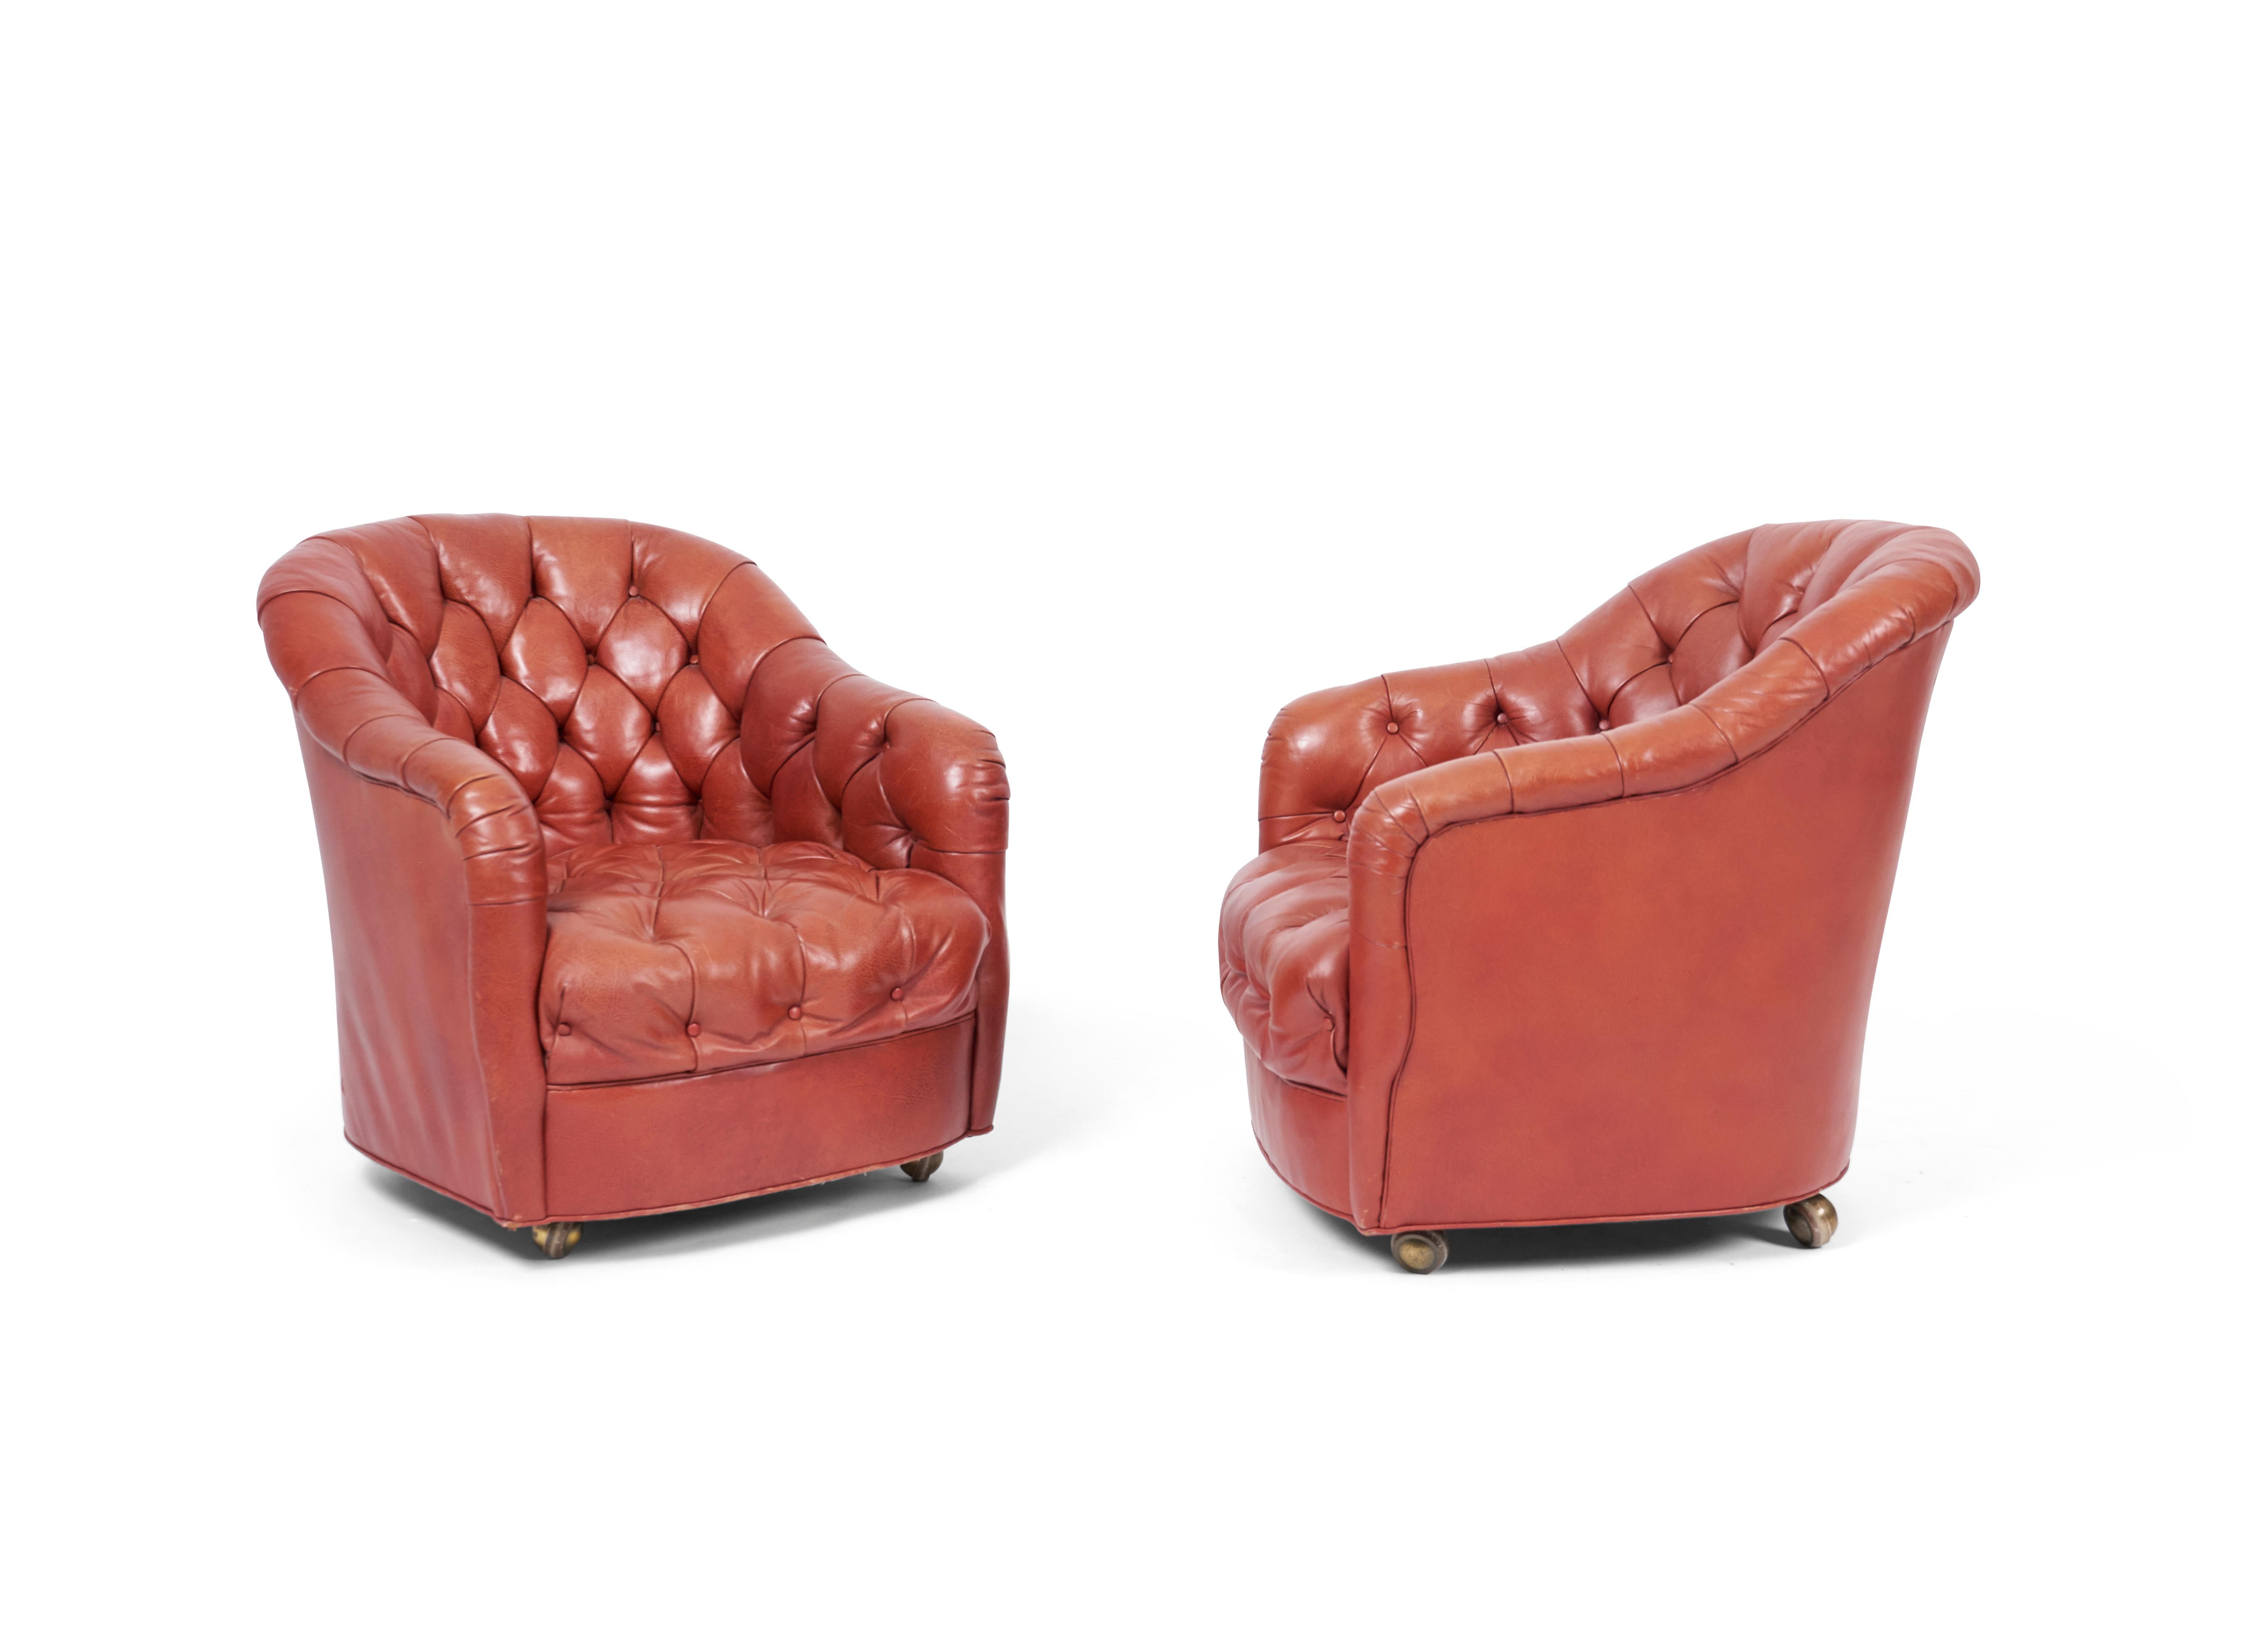 Chesterfield tufted lounge chairs by Ward Bennett for Brickell. Original brick red leather with castor wheels